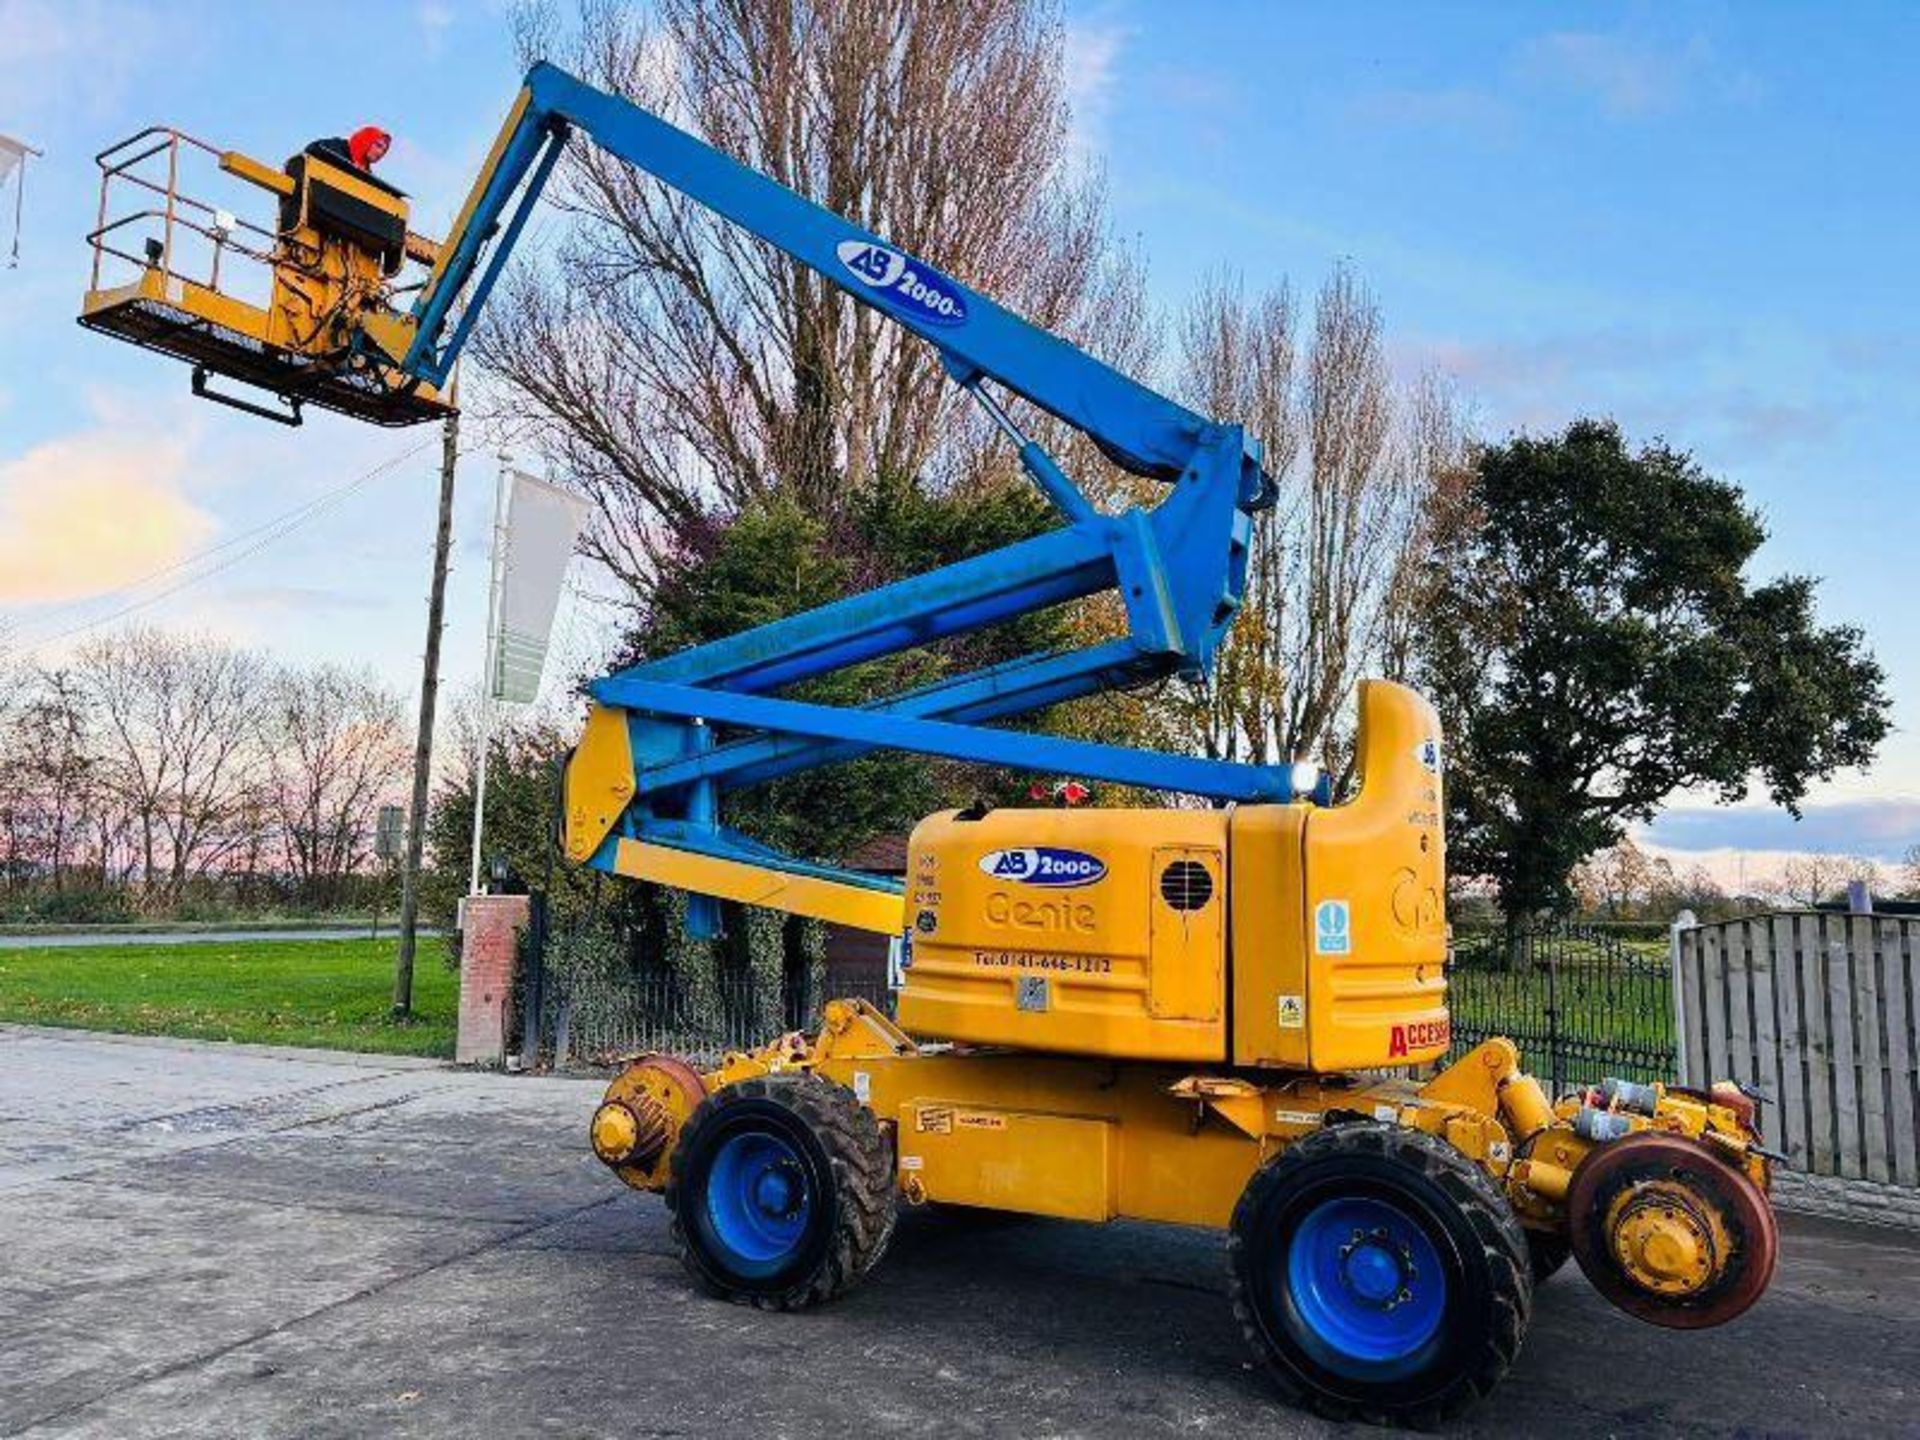 GENIE Z-60/34 4WD ARTICULATED RAIL ROAD BOOM LIFT * 20.3 METER REACH *. - Image 15 of 15